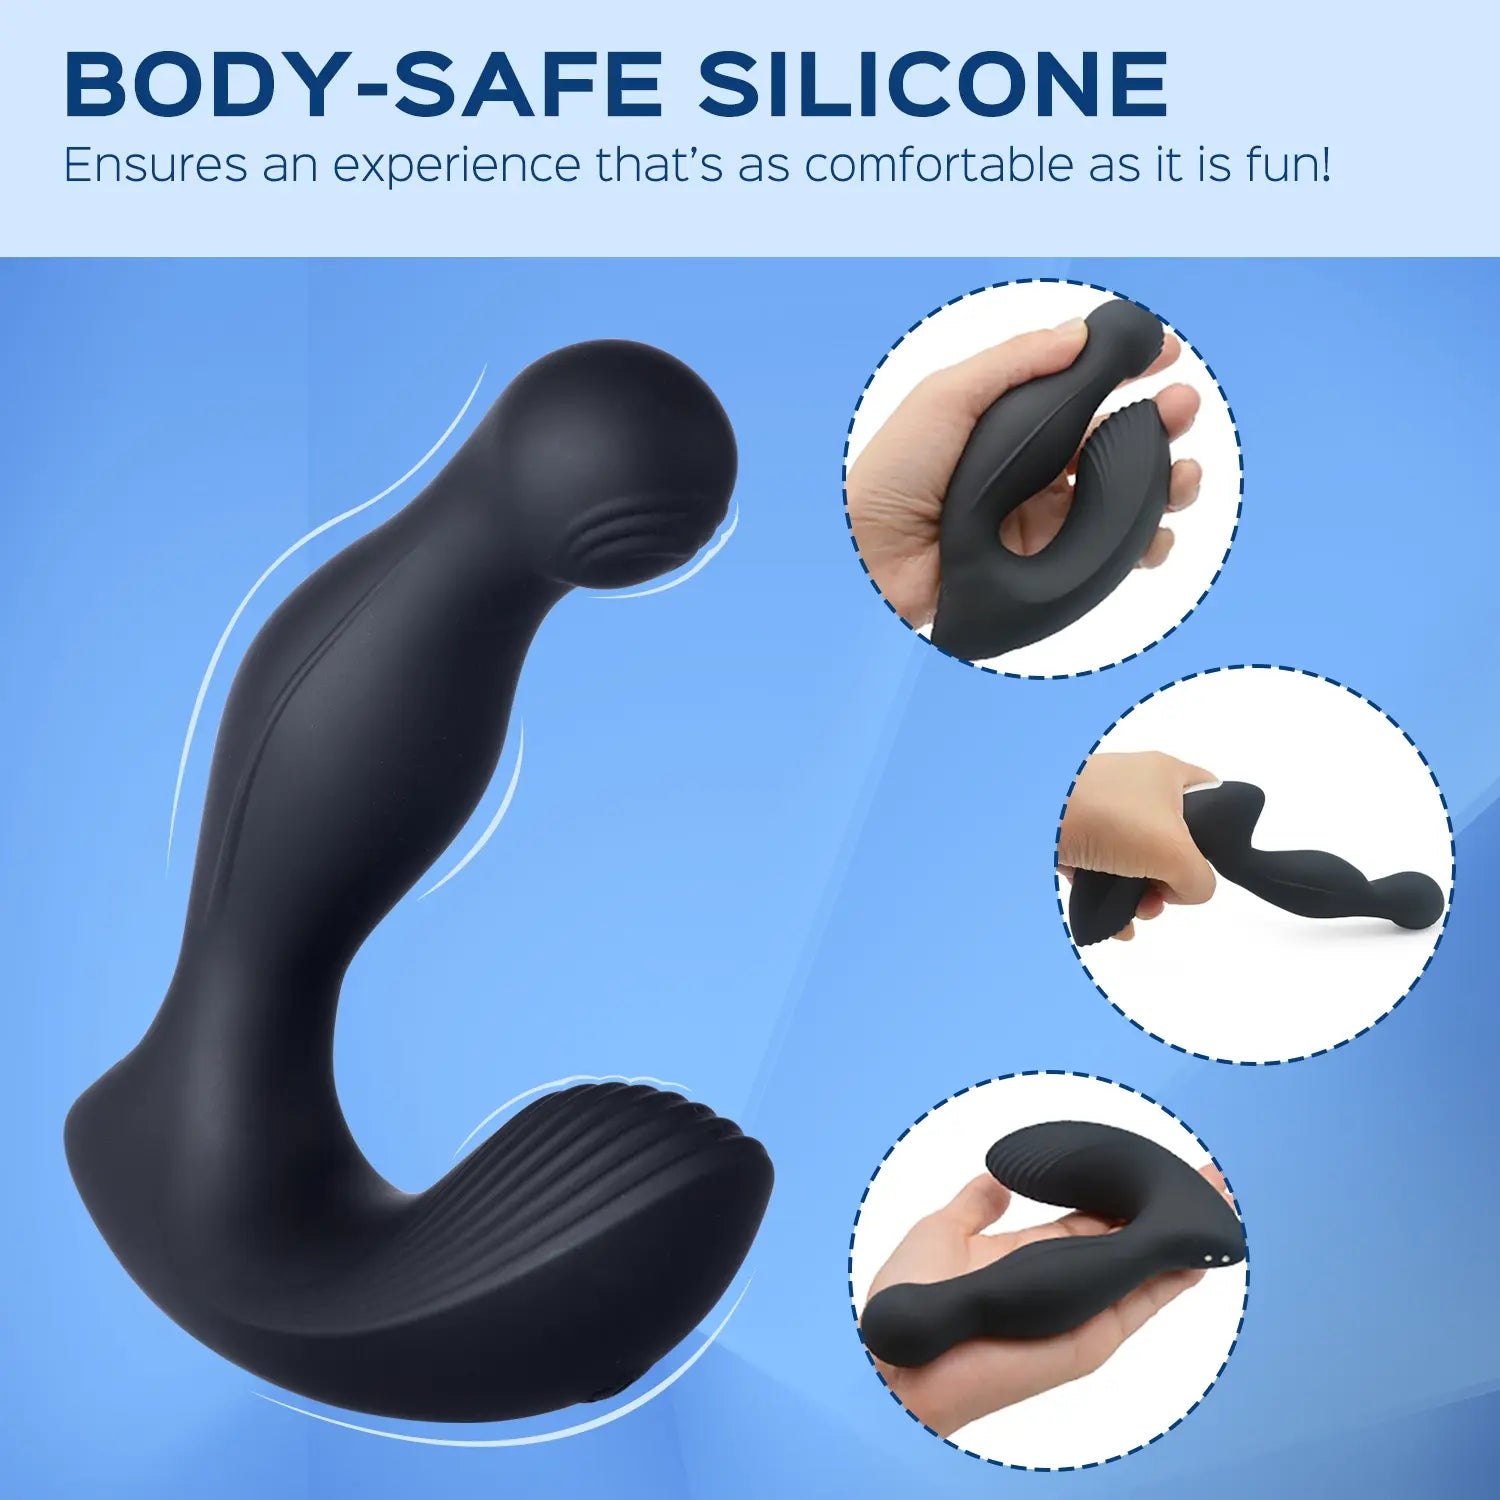 Akira - Remote Control Prostate and Perineum Massager